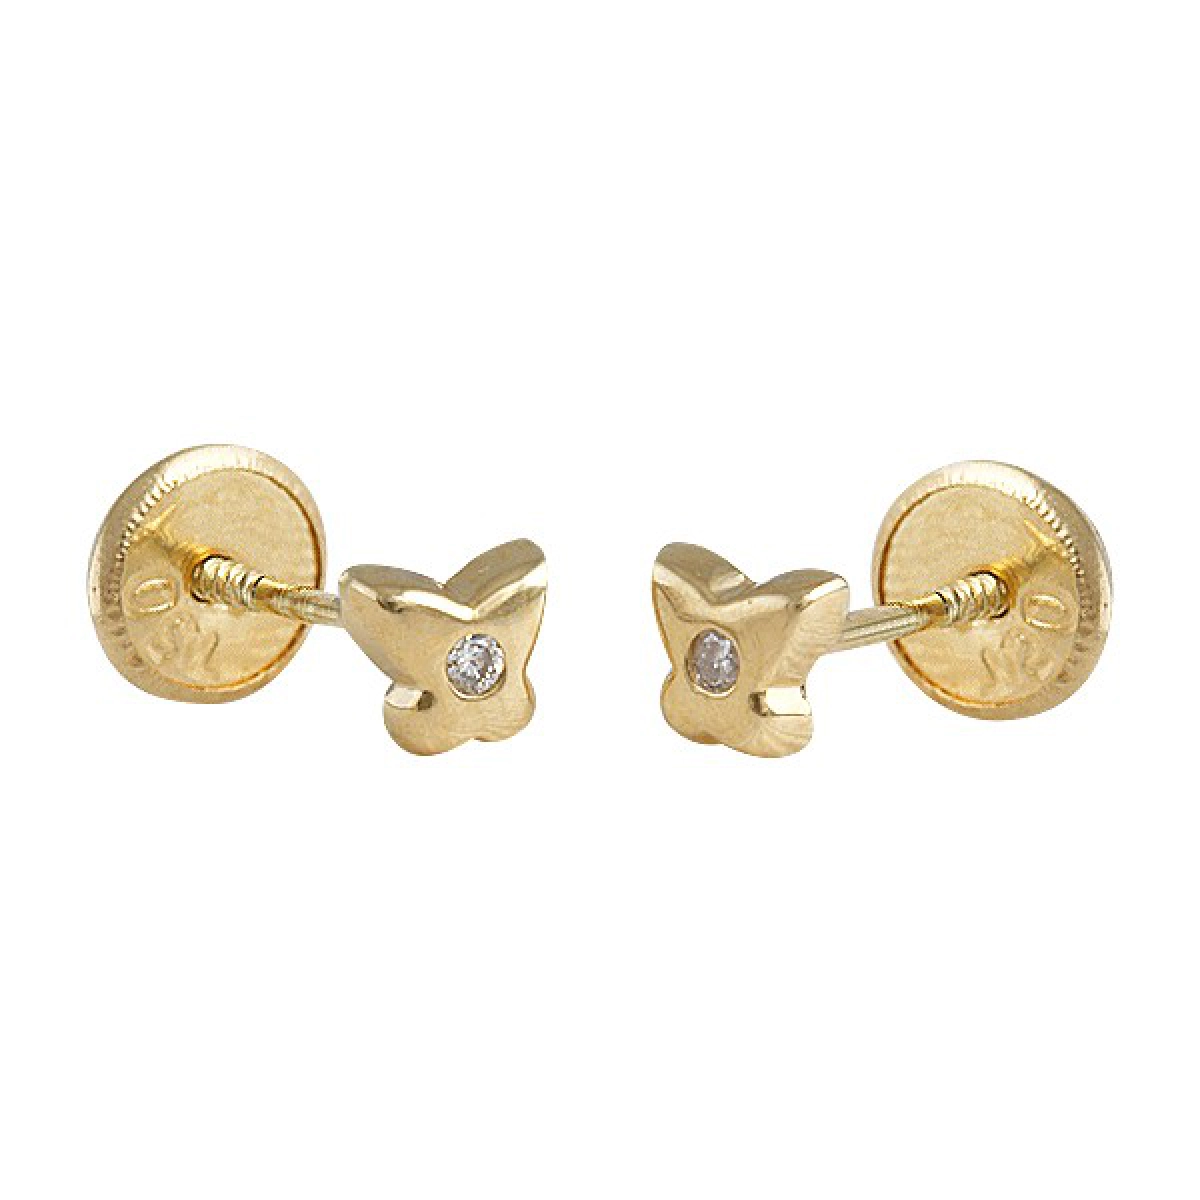 EARRINGS BABY LAW 18 K GOLD YELLOW WITH BRILLIANT 446468 O / Karammelo 446468 o/a